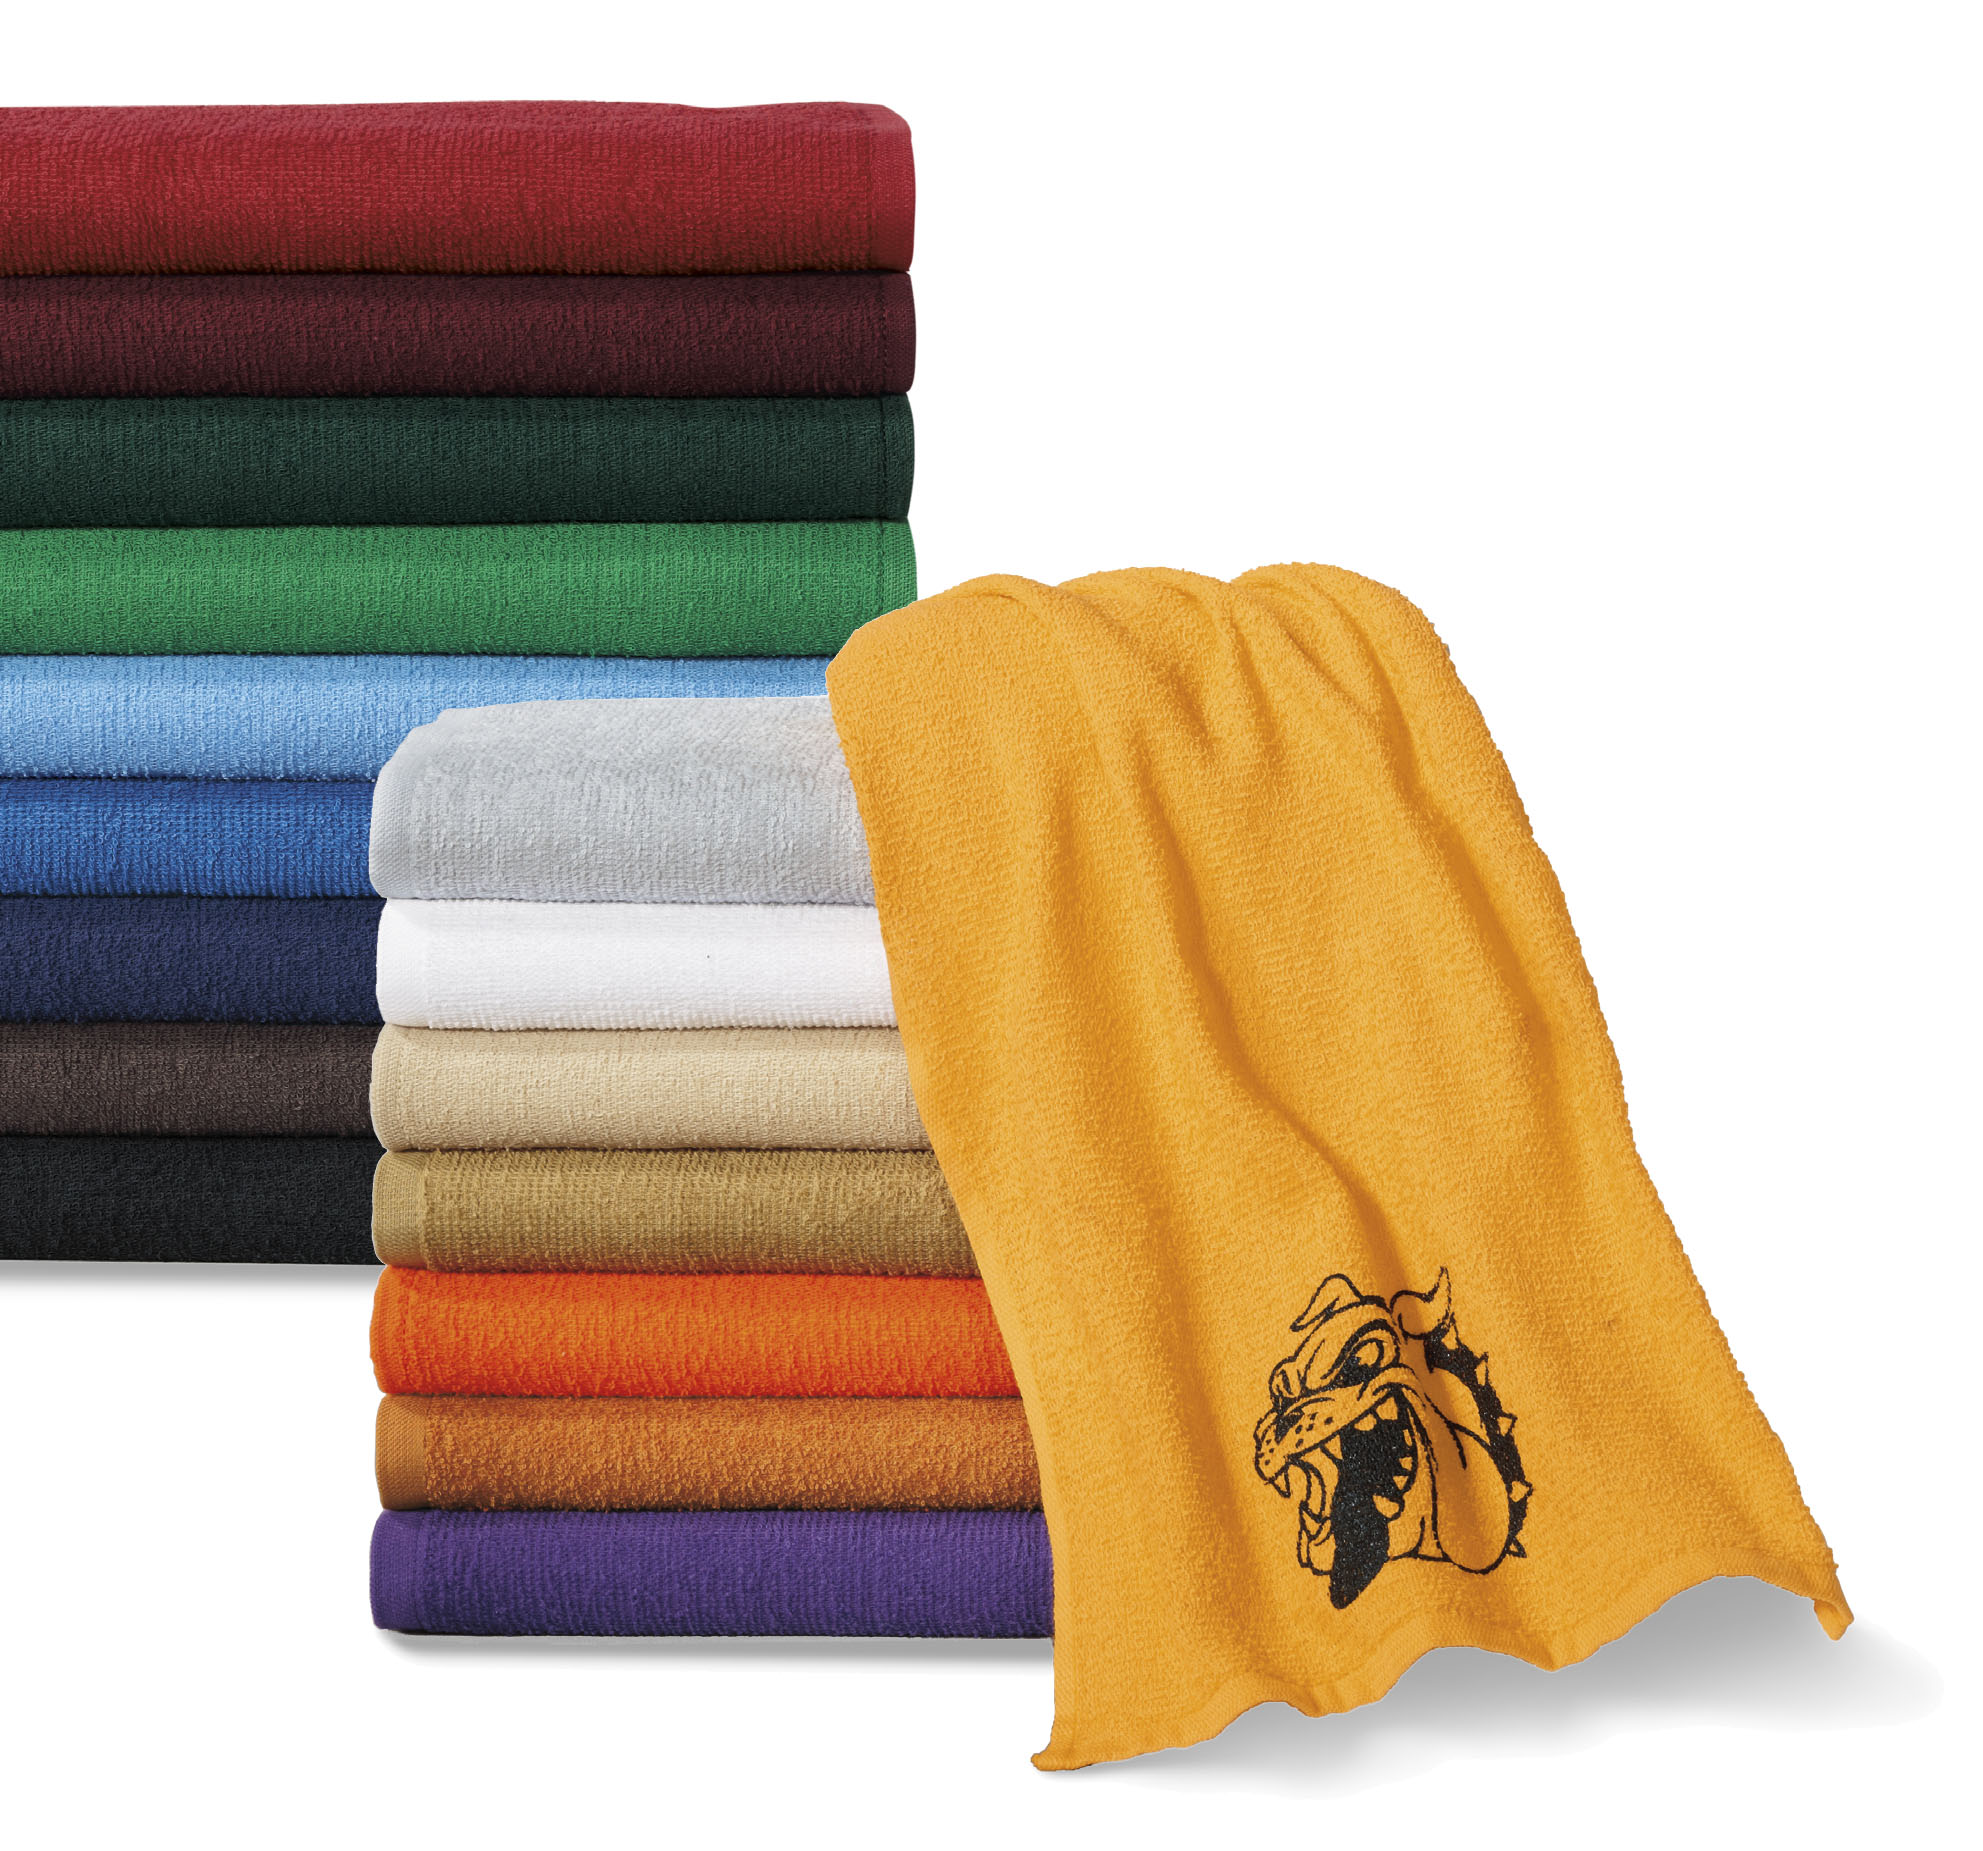 We just added custom rally towels back to our inventory. You can now design your towels with your logo or family members jersey number to show support at an event.